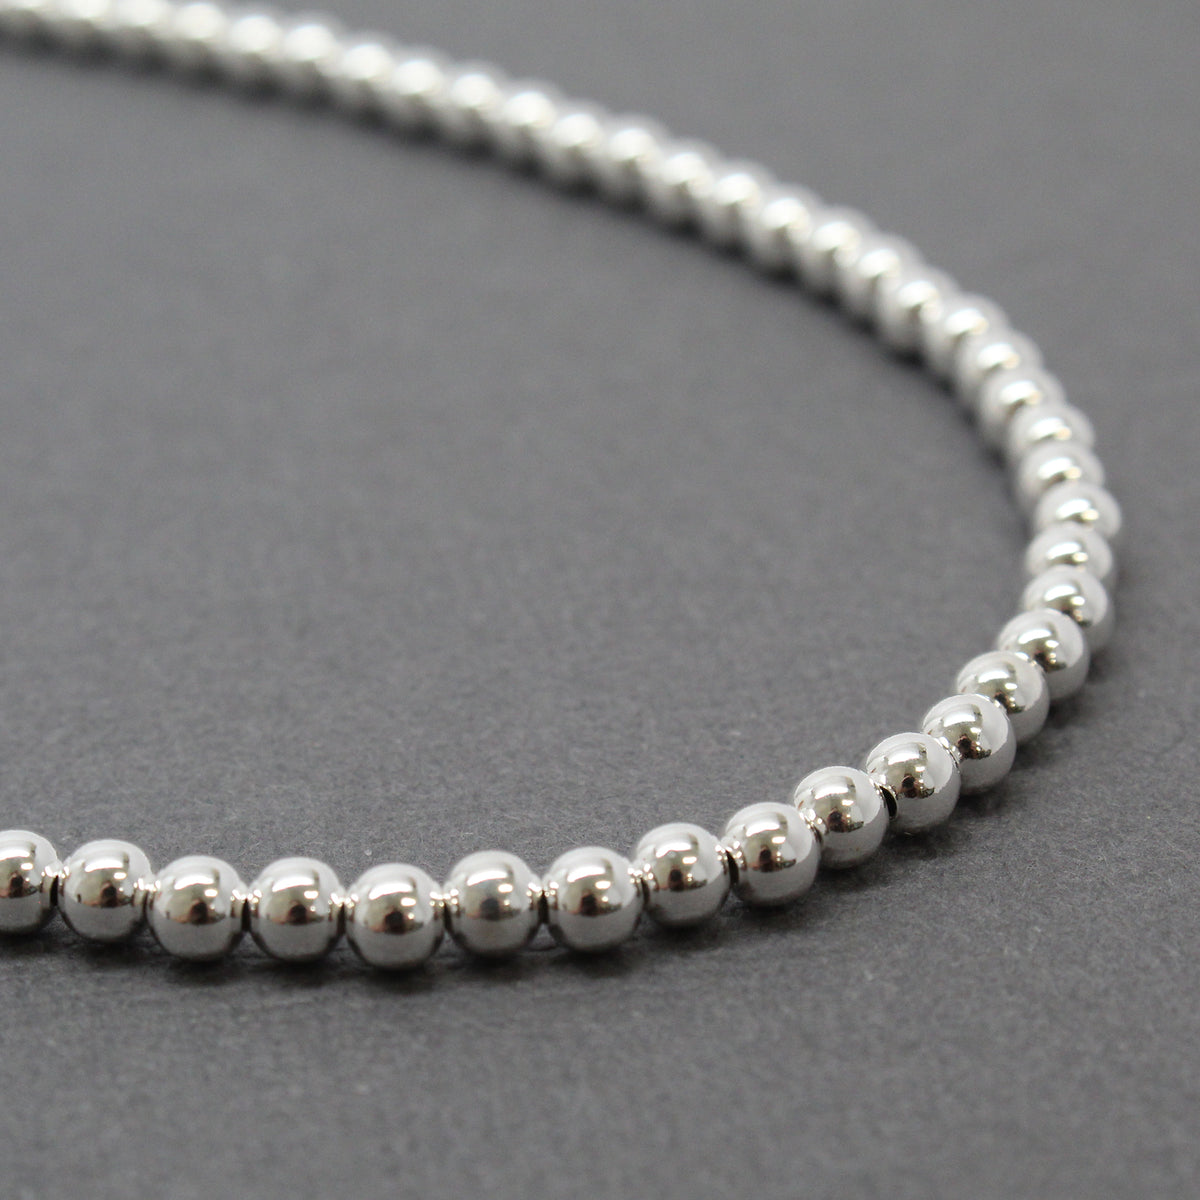 4mm Sterling Silver Bead Necklace Strand 13